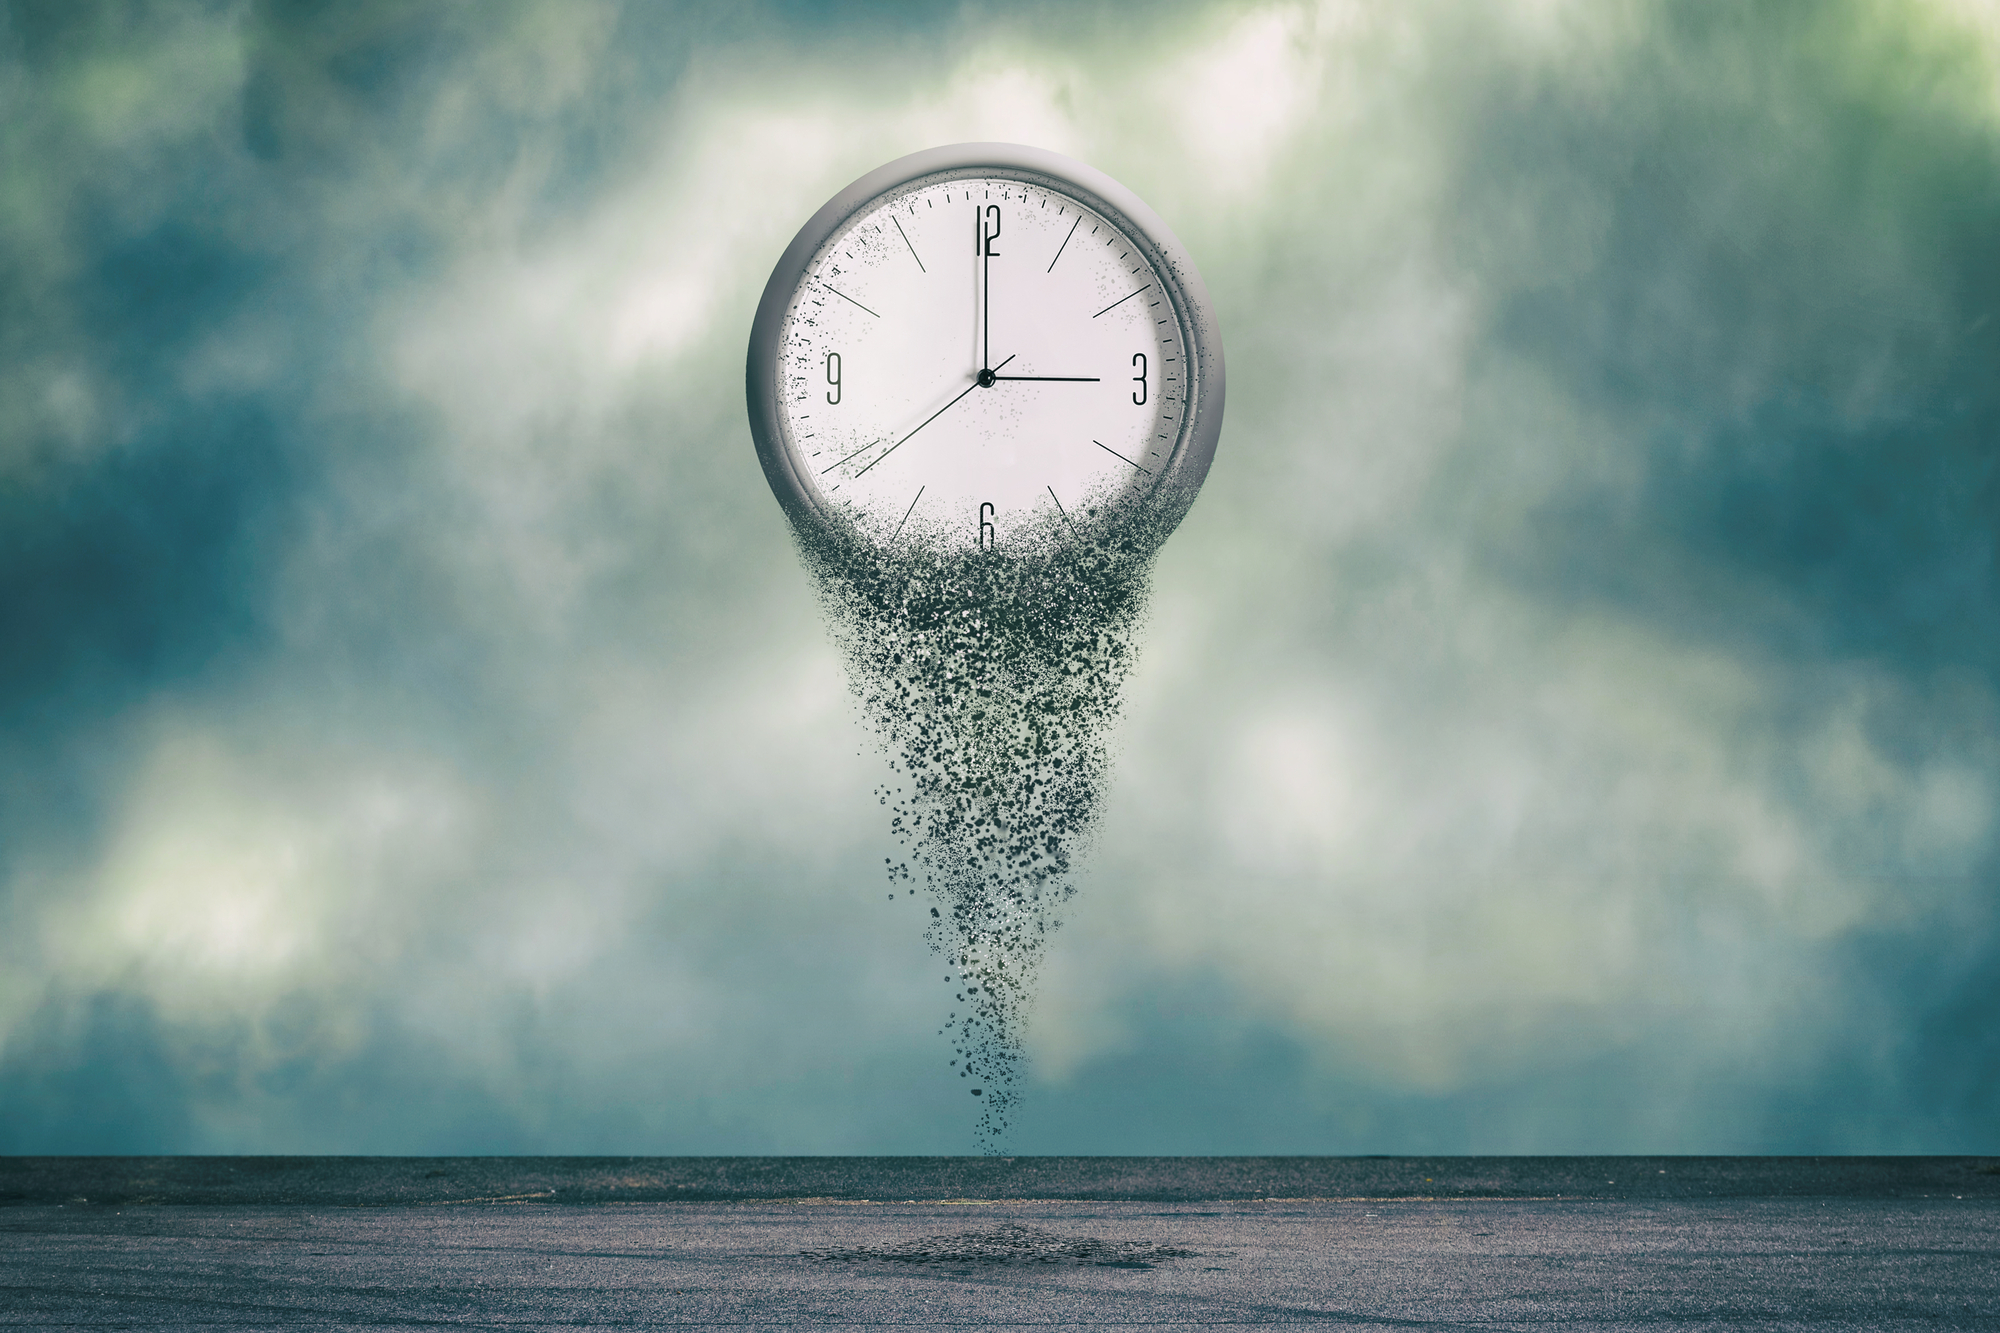 If you are considering dissolving a business, you may want to consult a dissolution lawyer Connecticut residents trust - Clock falls apart, in the cloudy sky. Dispersion effect. The concept of the passing time. Business. Lifestyle.